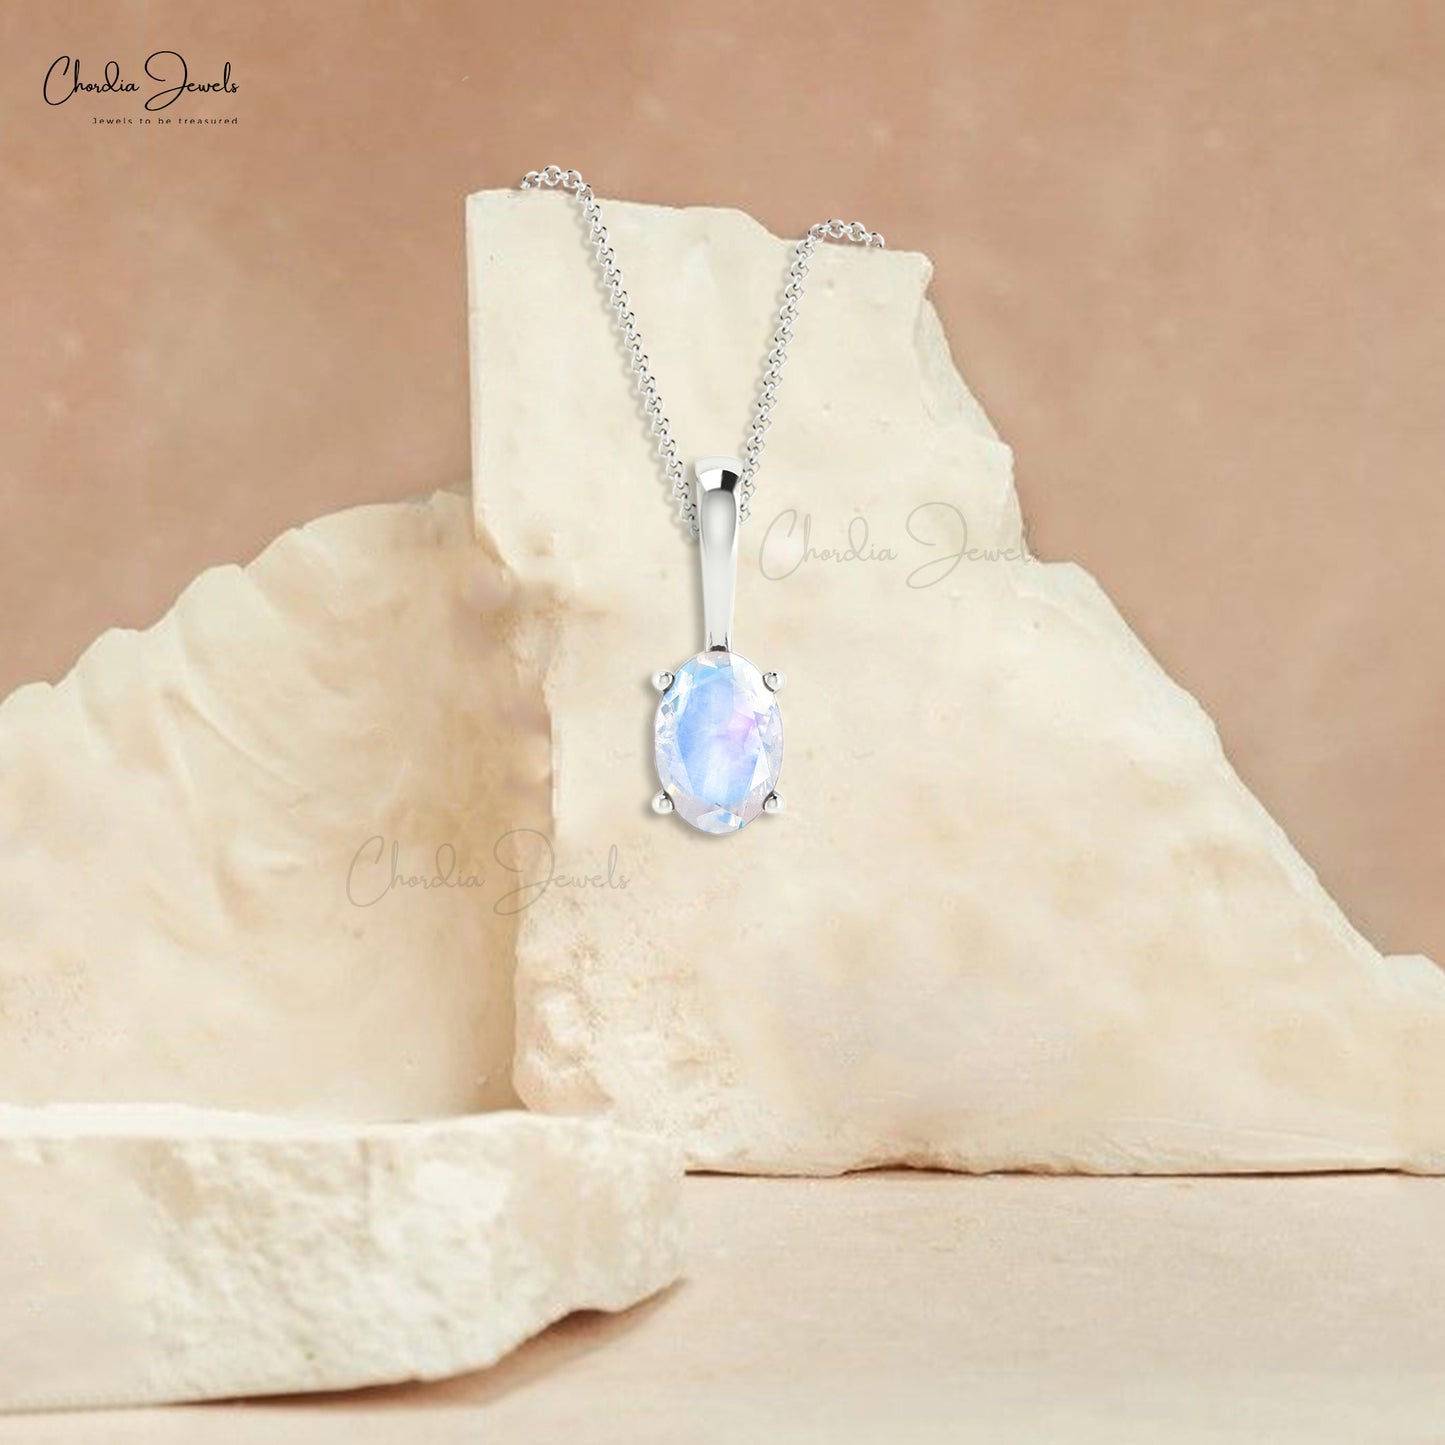 Load image into Gallery viewer, Delicate 0.28Ct Rainbow Moonstone Solitaire Pendant 14k Gold Oval Cut Gemstone Fine Jewelry
